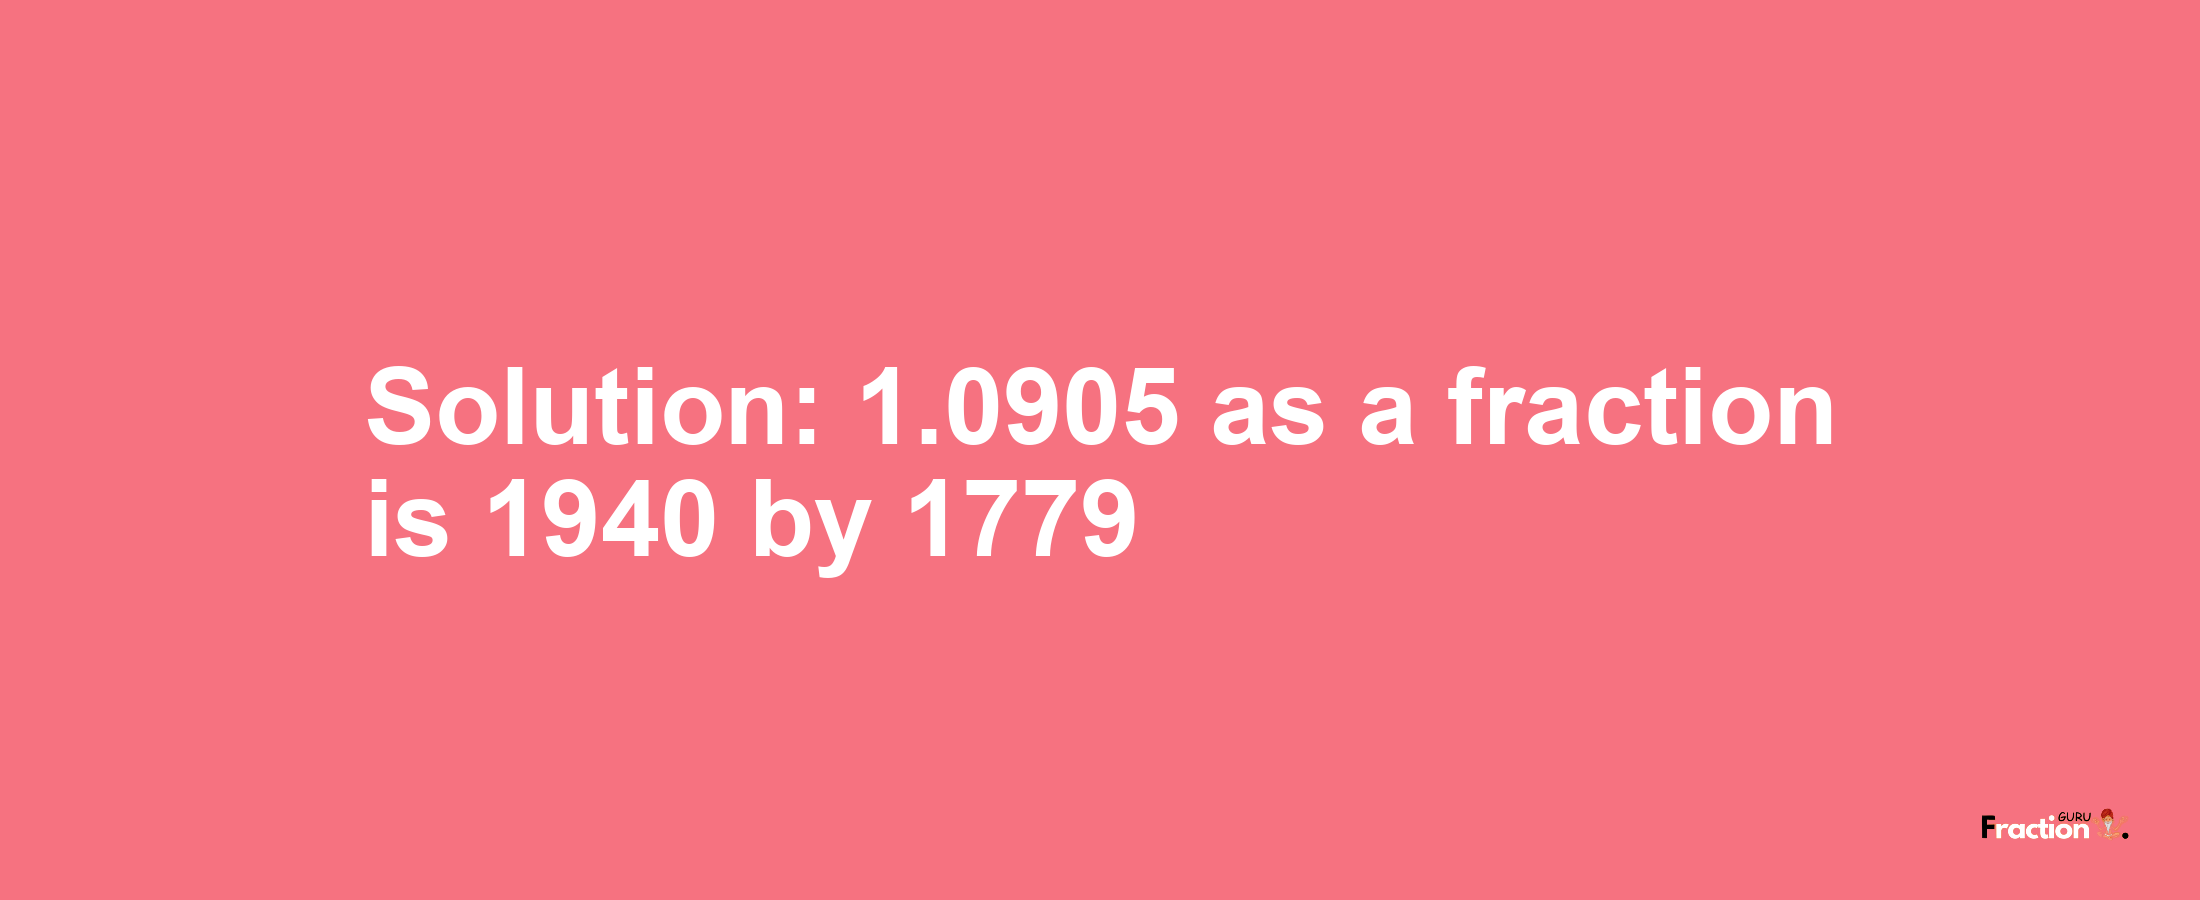 Solution:1.0905 as a fraction is 1940/1779